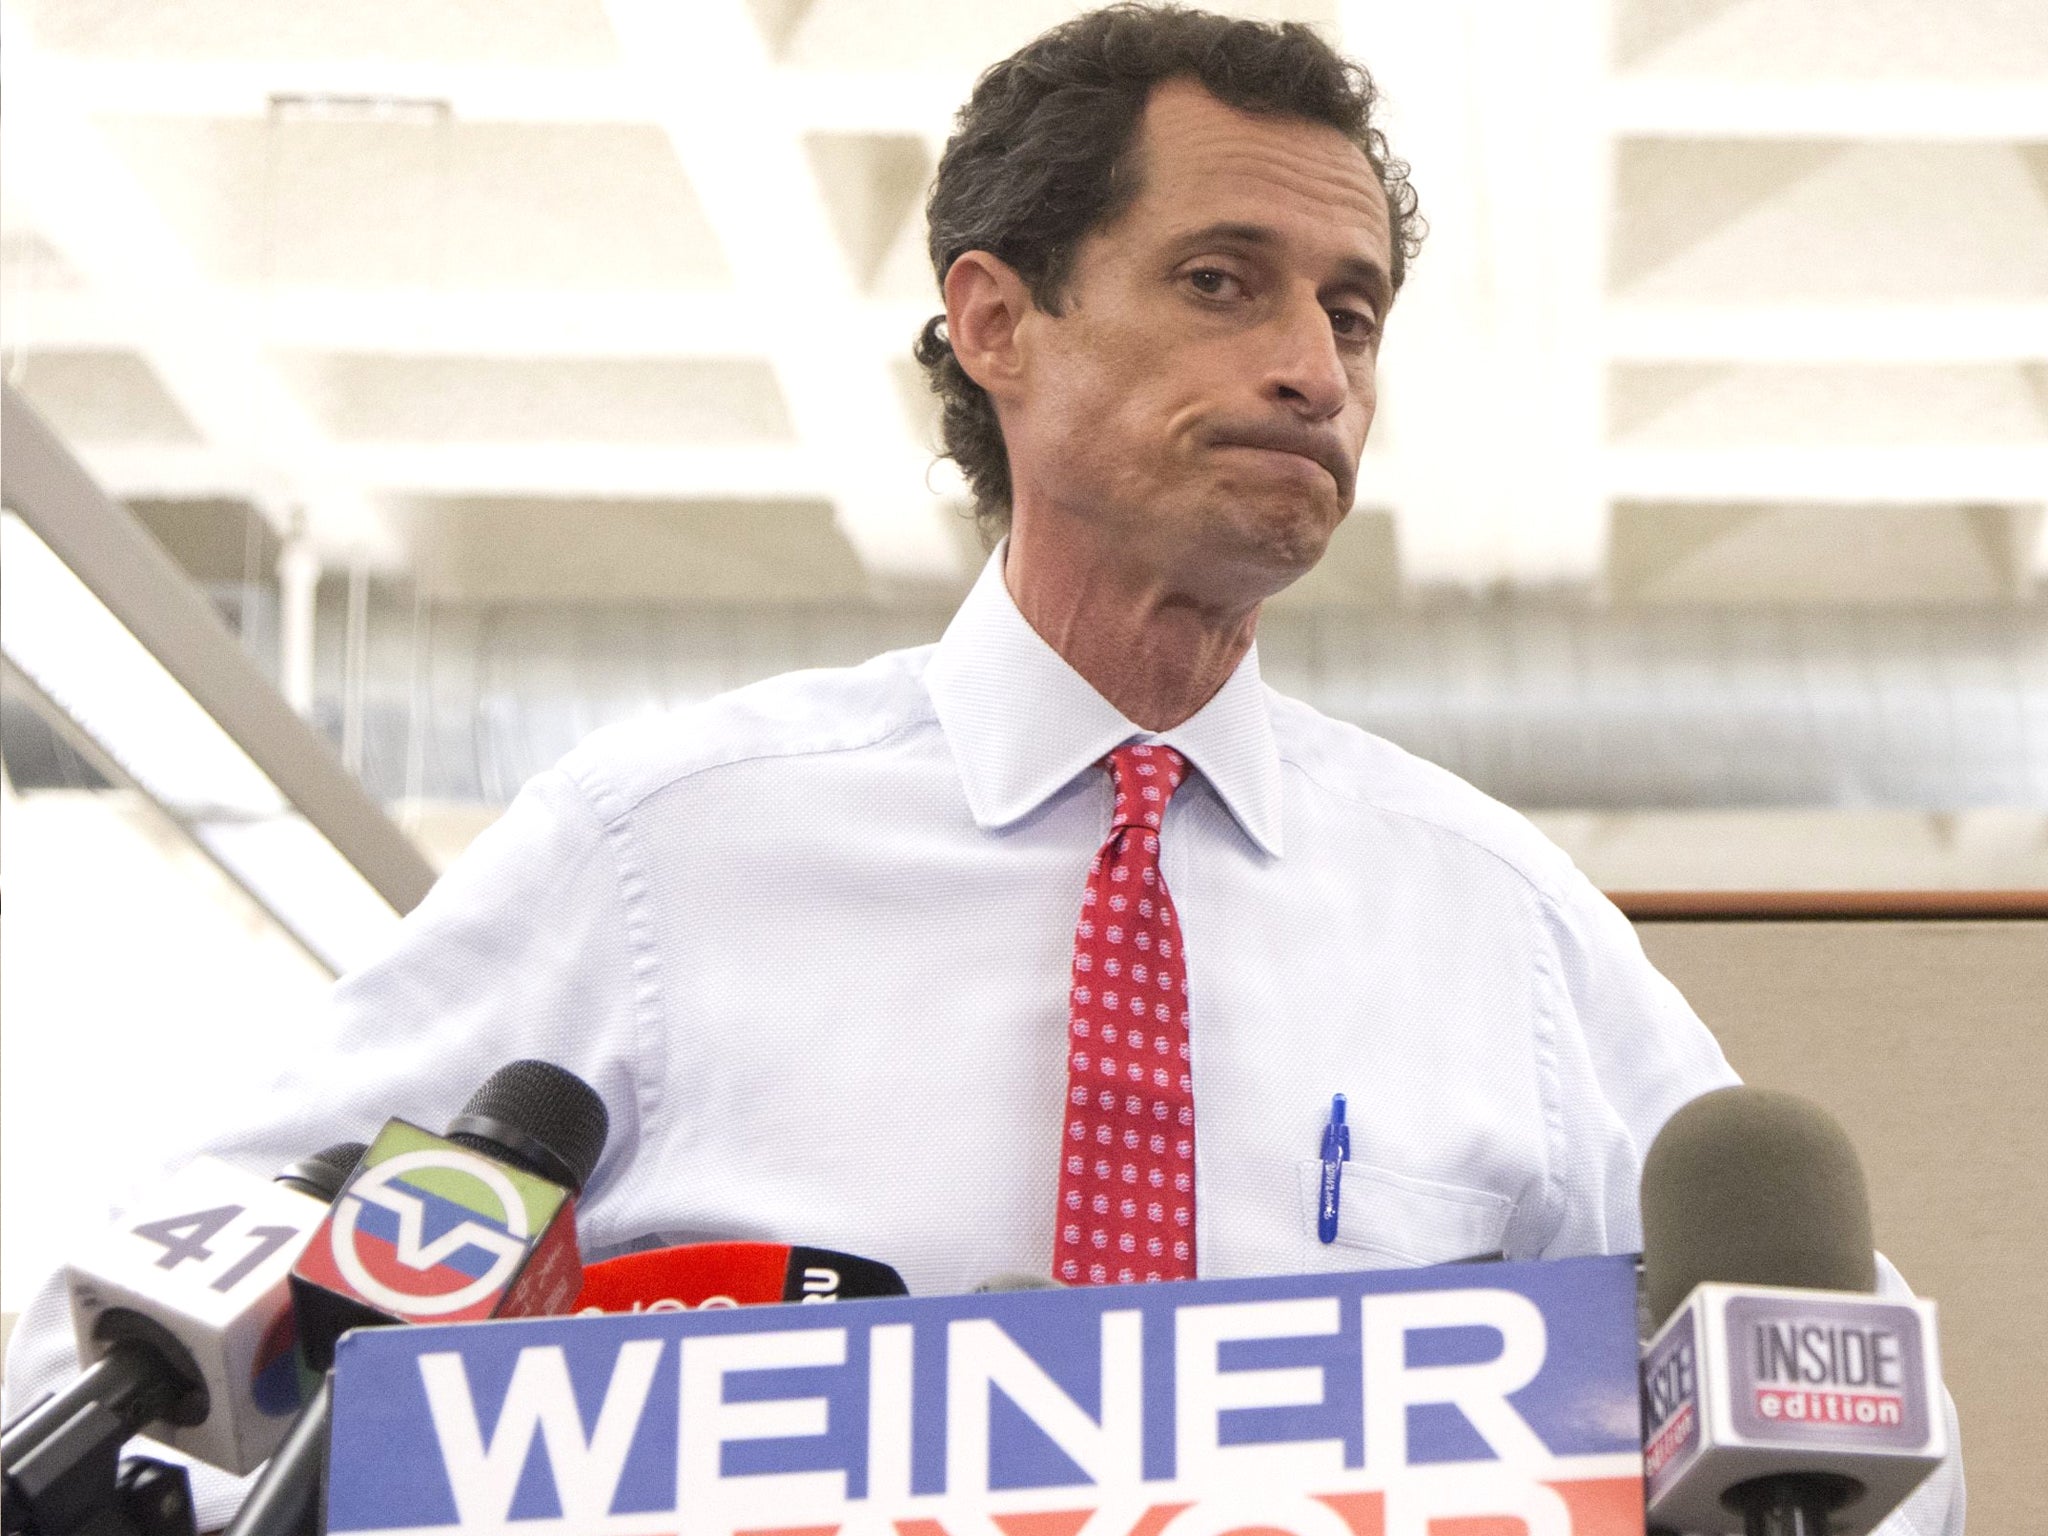 Mr Weiner was close to winning the mayoral election in 2013